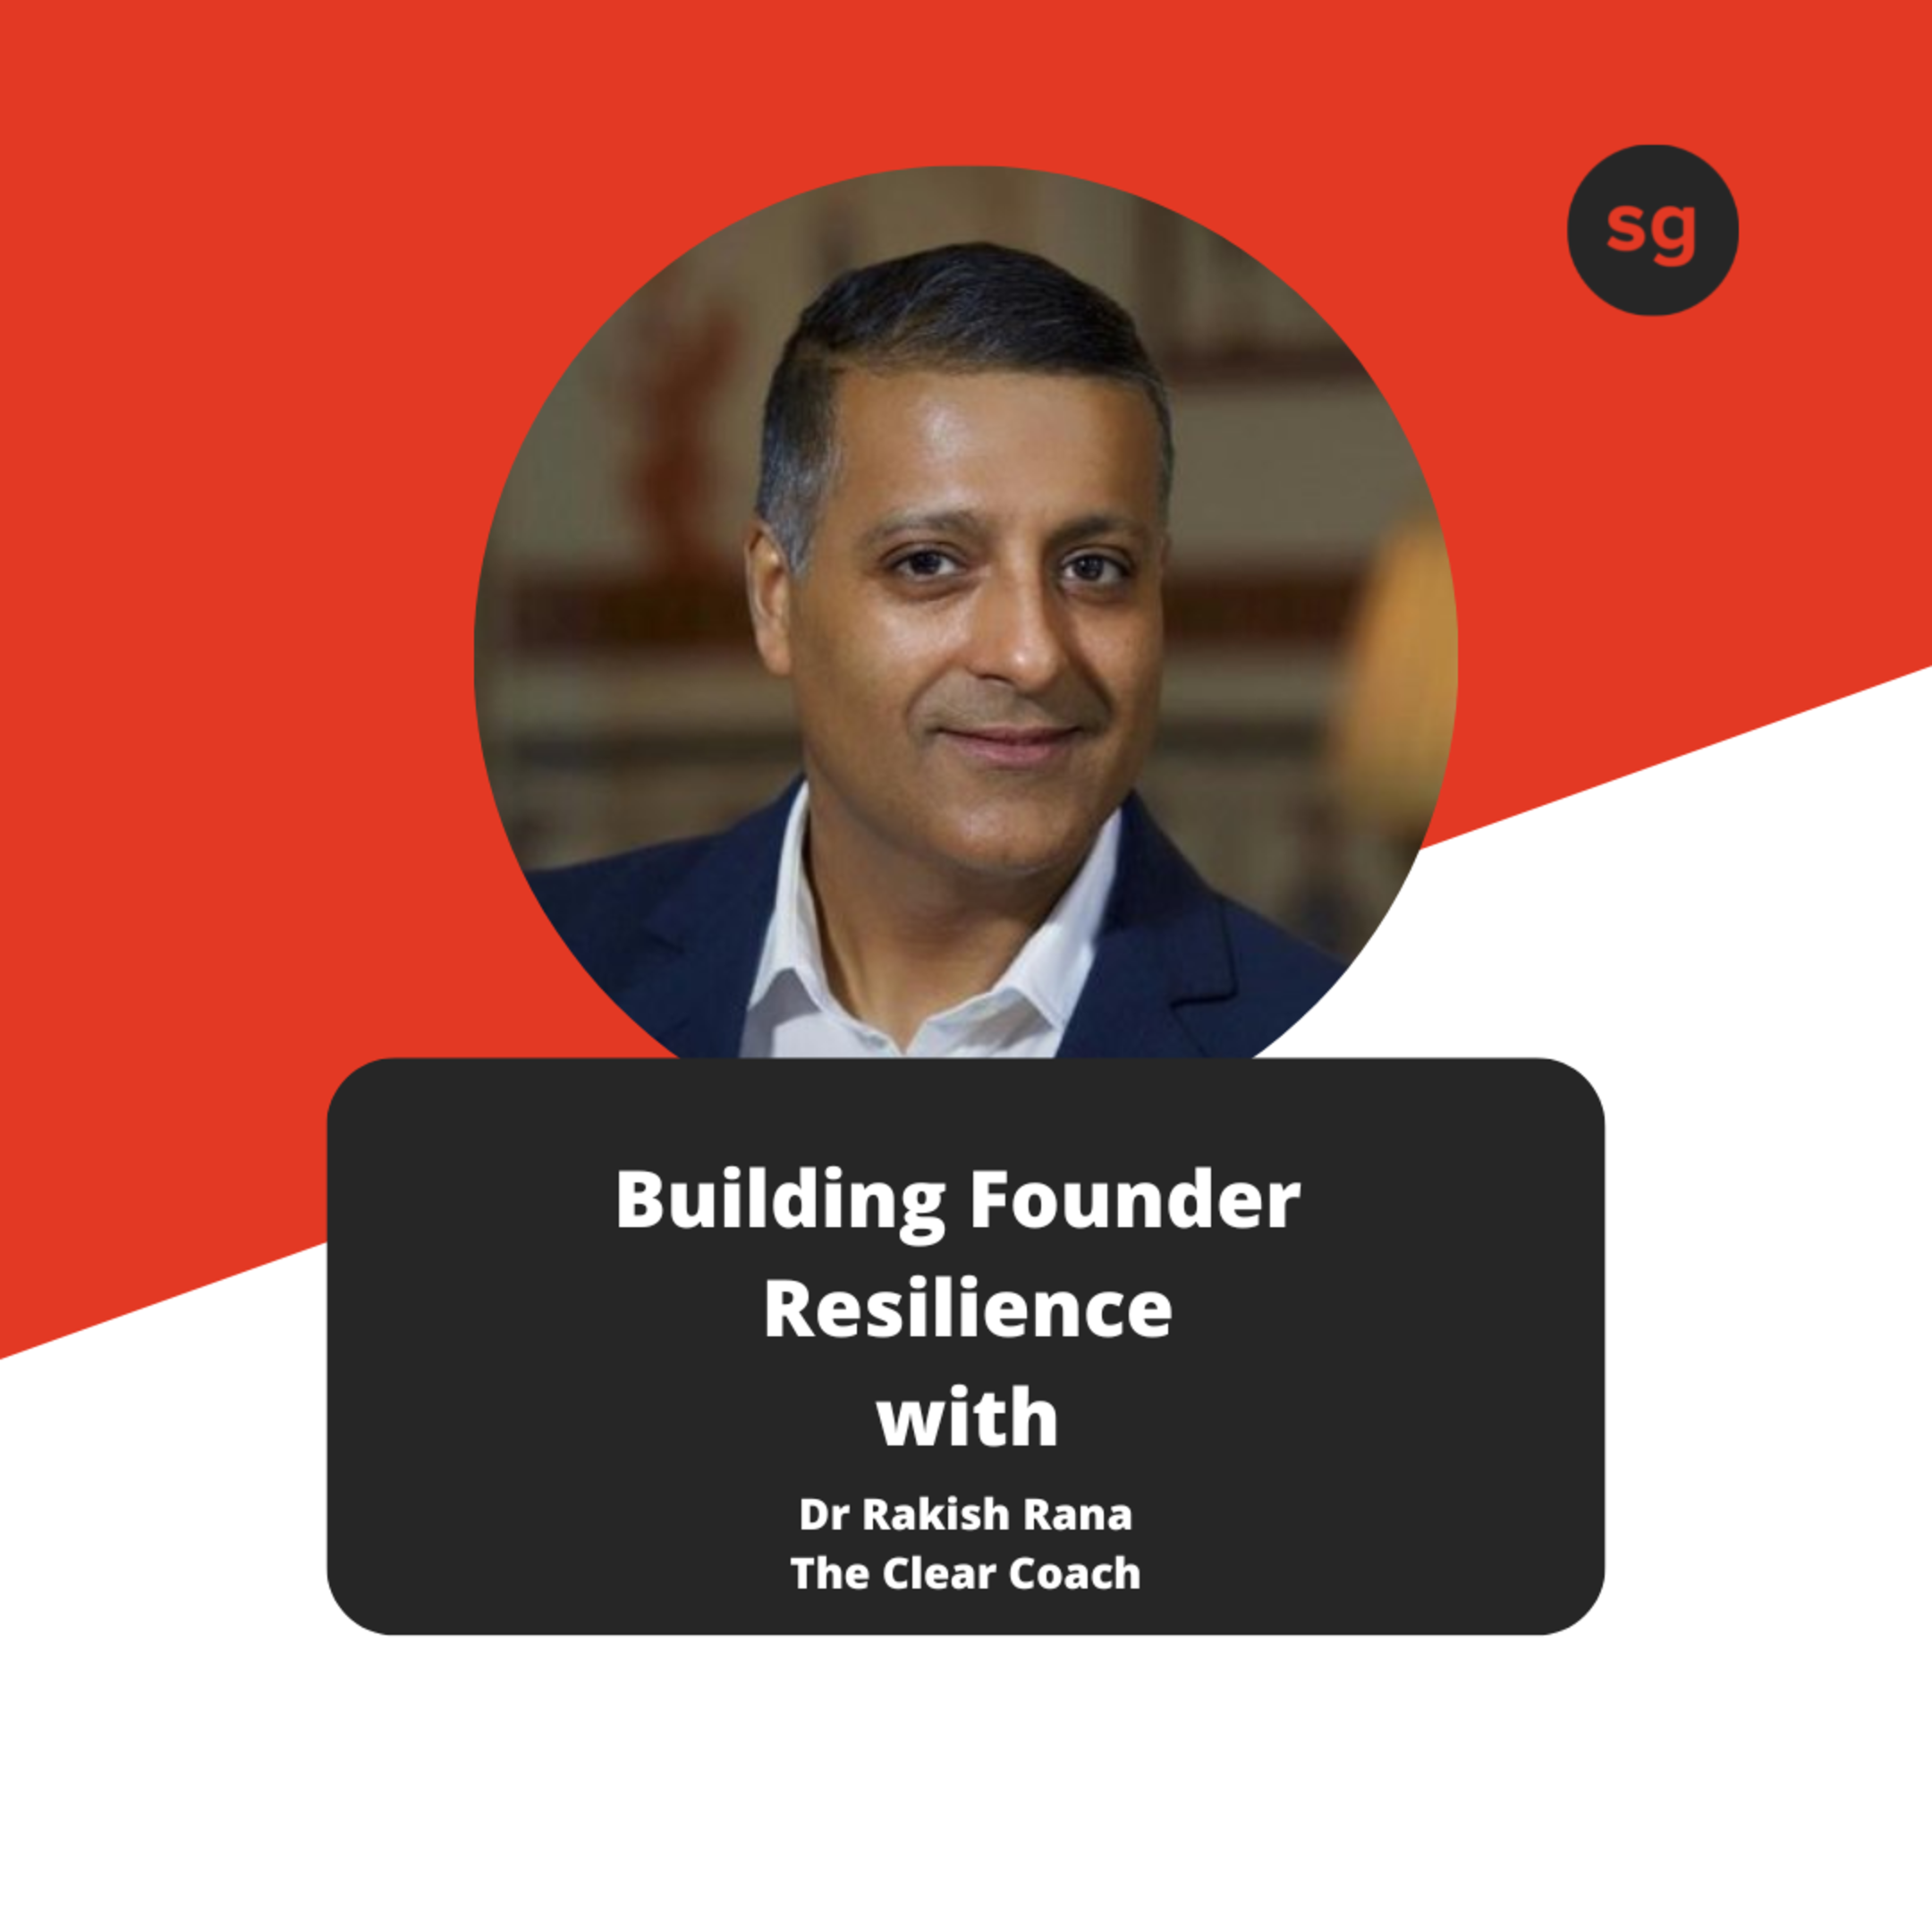 See Building Founder Resilience at Startup Grind Leeds